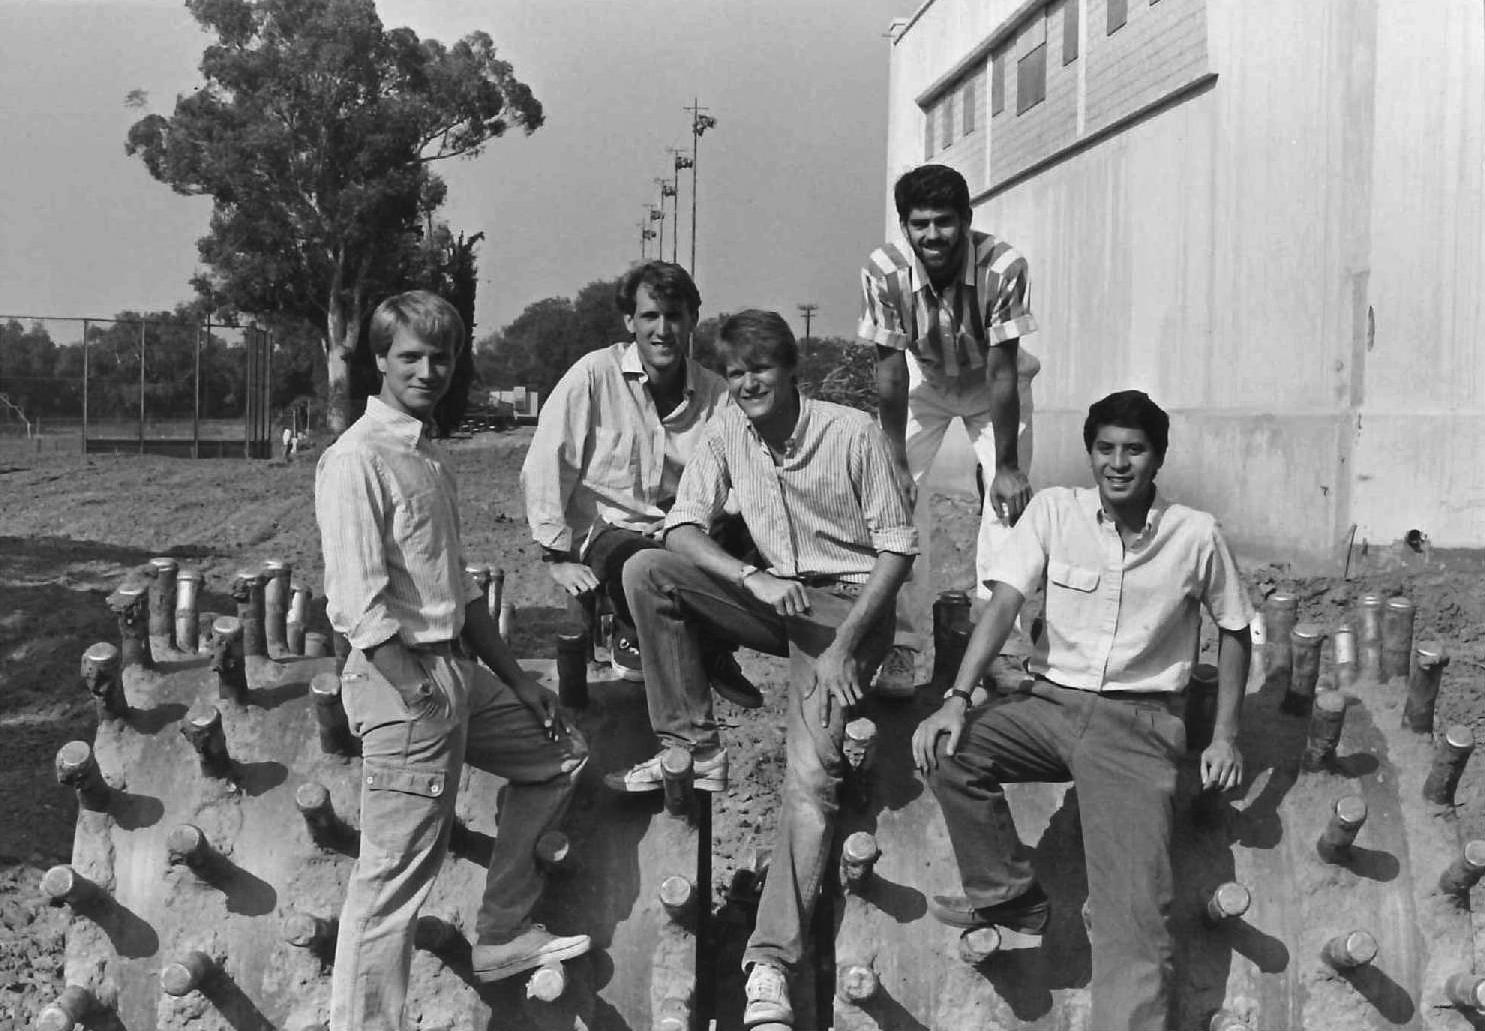 Strom at Pomona College Rains center with friends, 1988